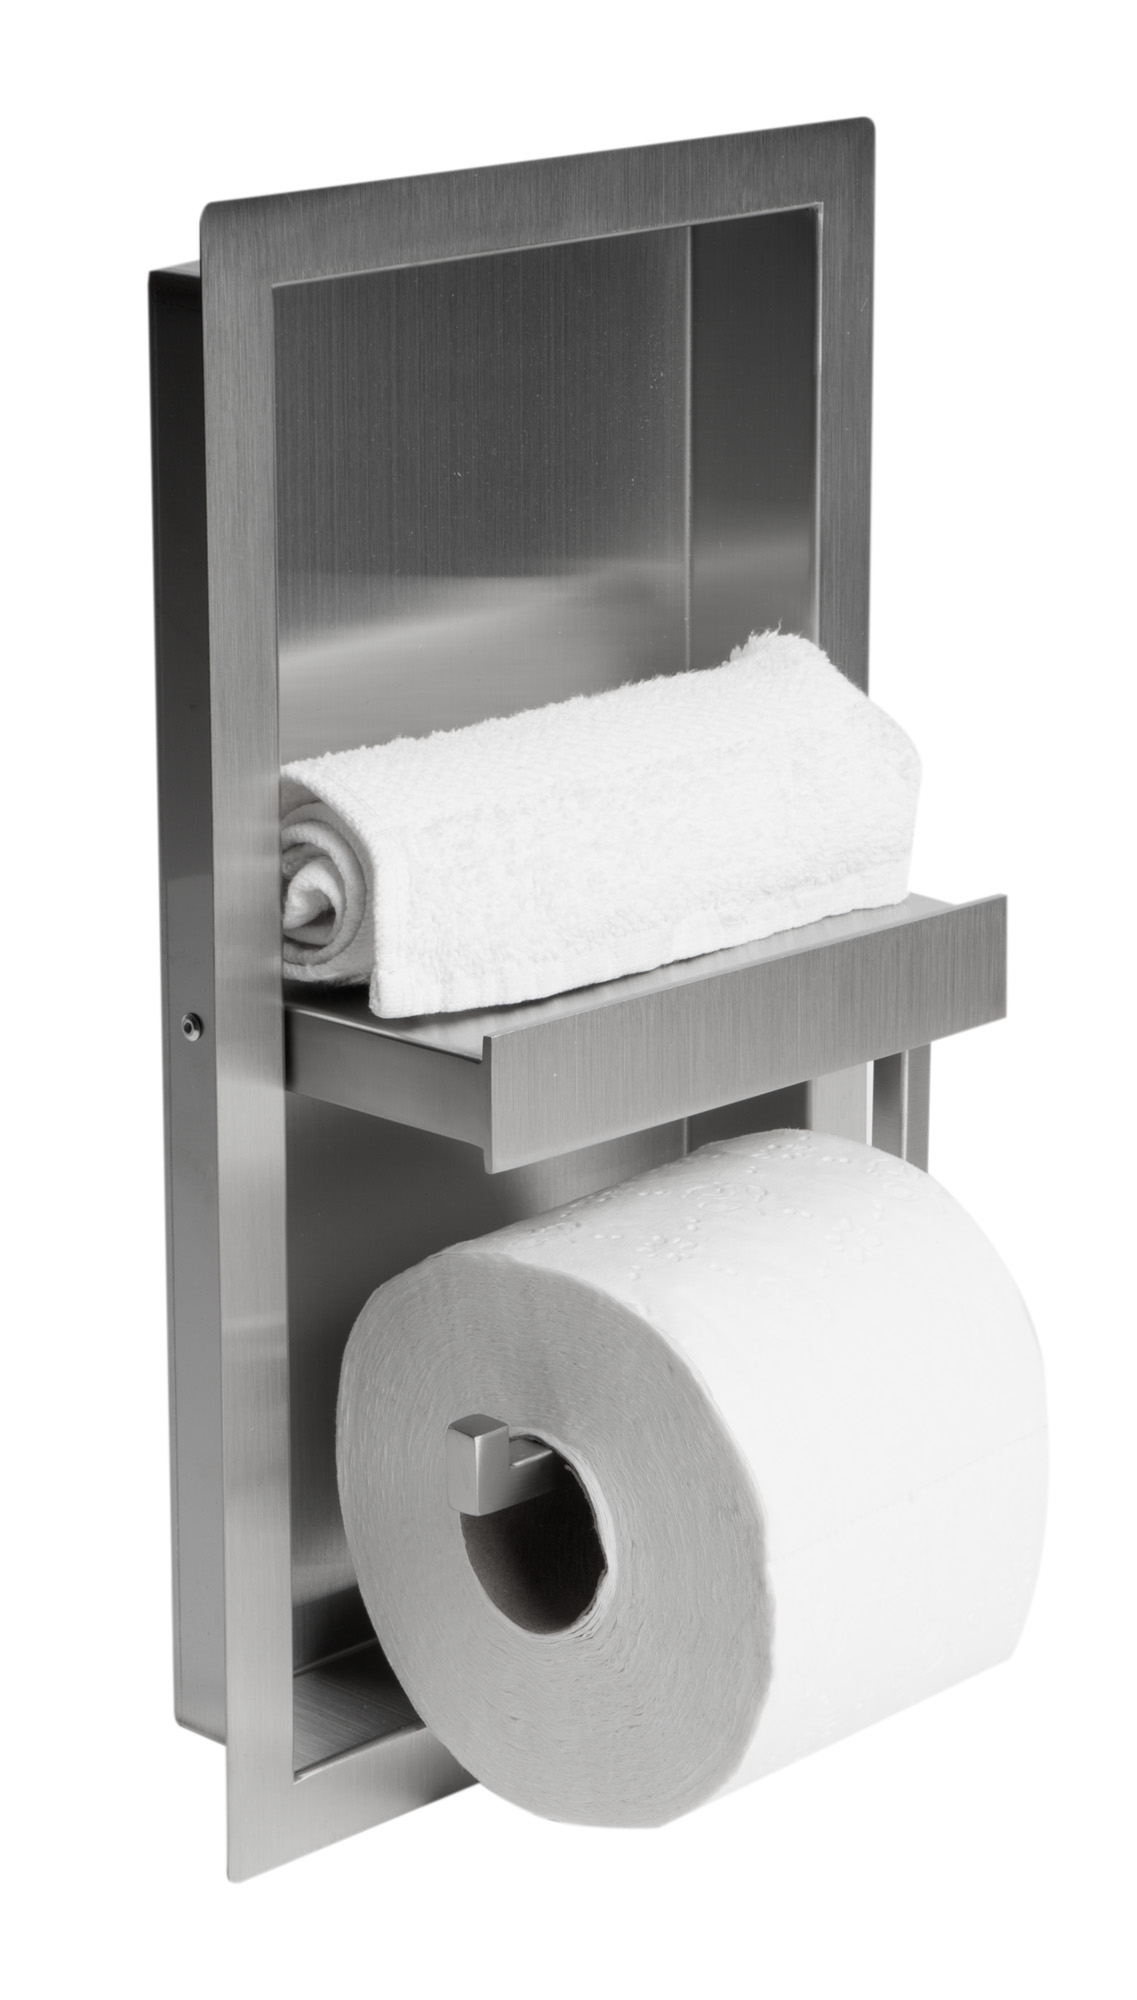 ALFI brand ABTPN88-BSS Brushed Stainless Steel Recessed Shelf / Toilet Paper Holder Niche